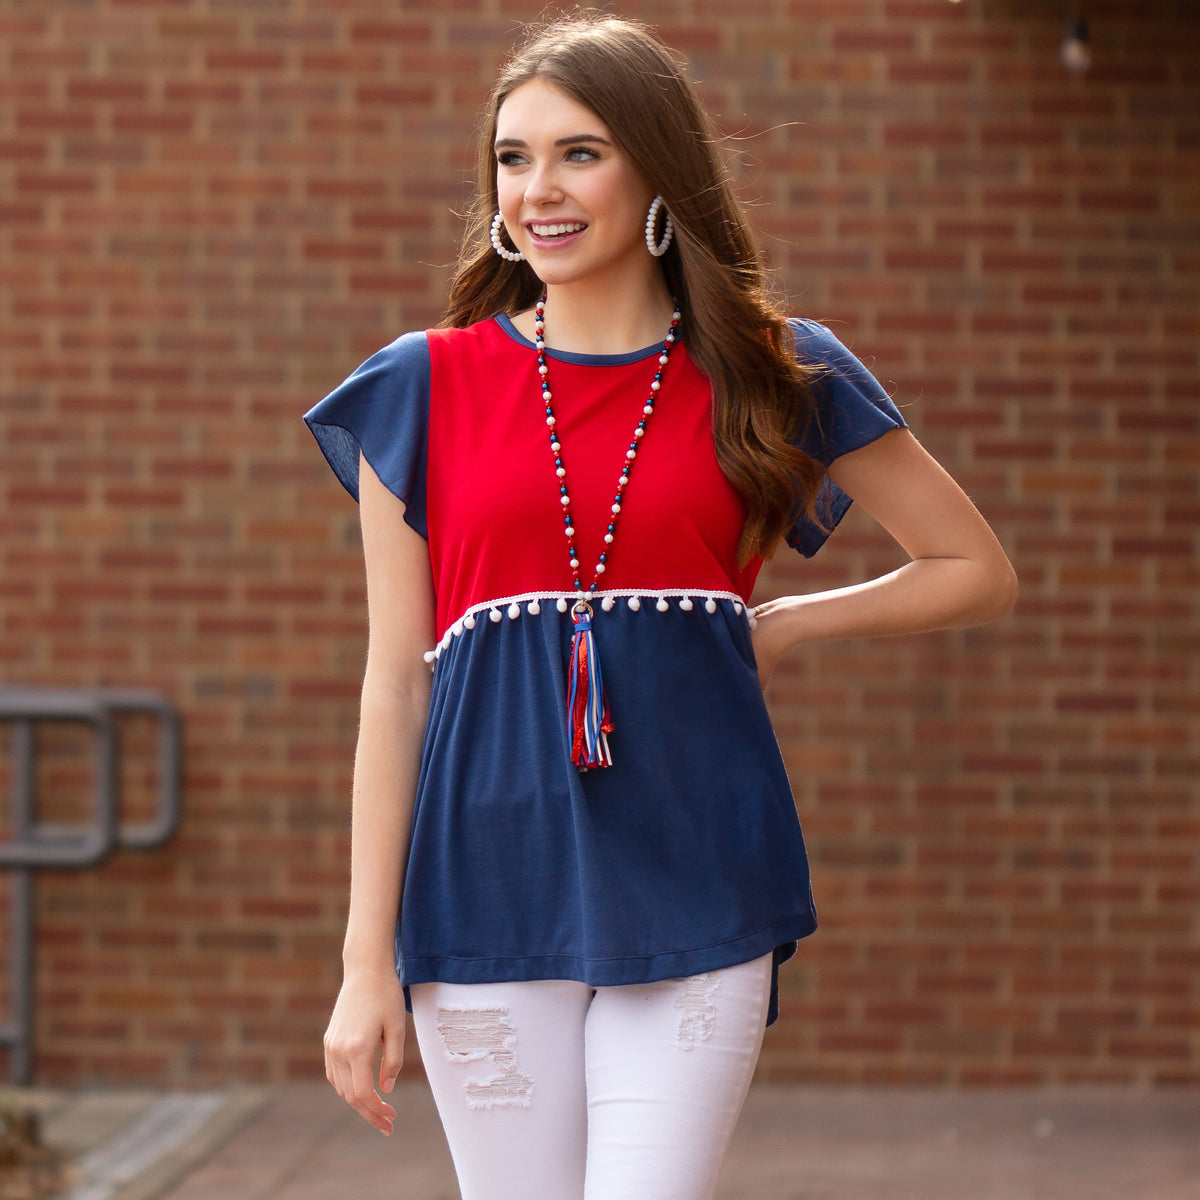 10695 - Forth of July Baby Doll Top